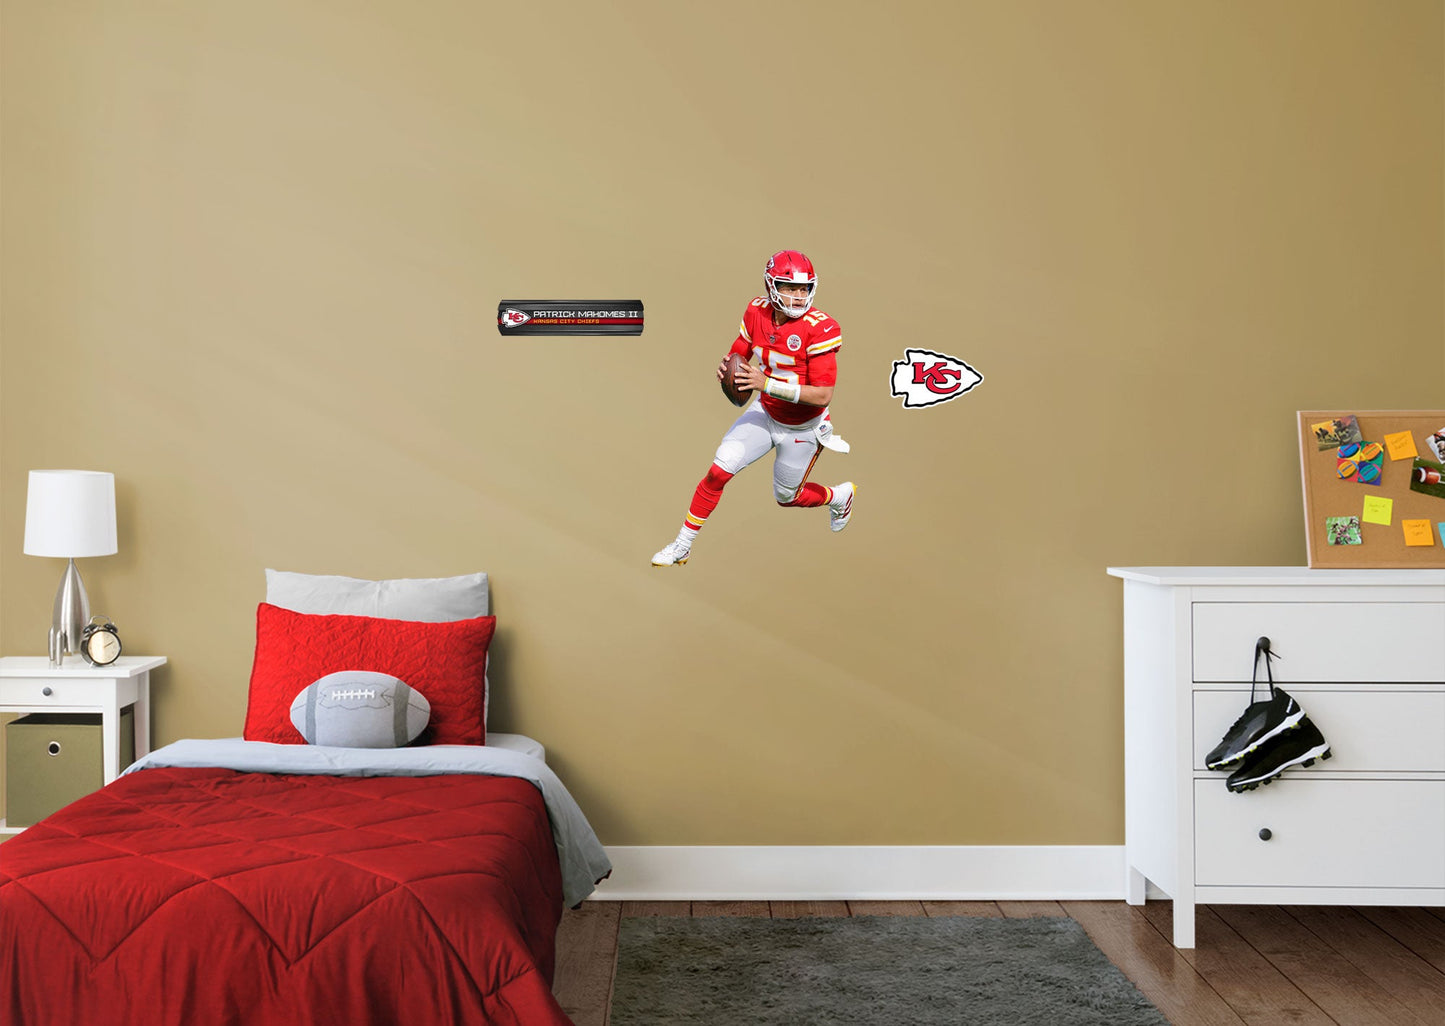 Kansas City Chiefs: Patrick Mahomes II         - Officially Licensed NFL Removable Wall   Adhesive Decal